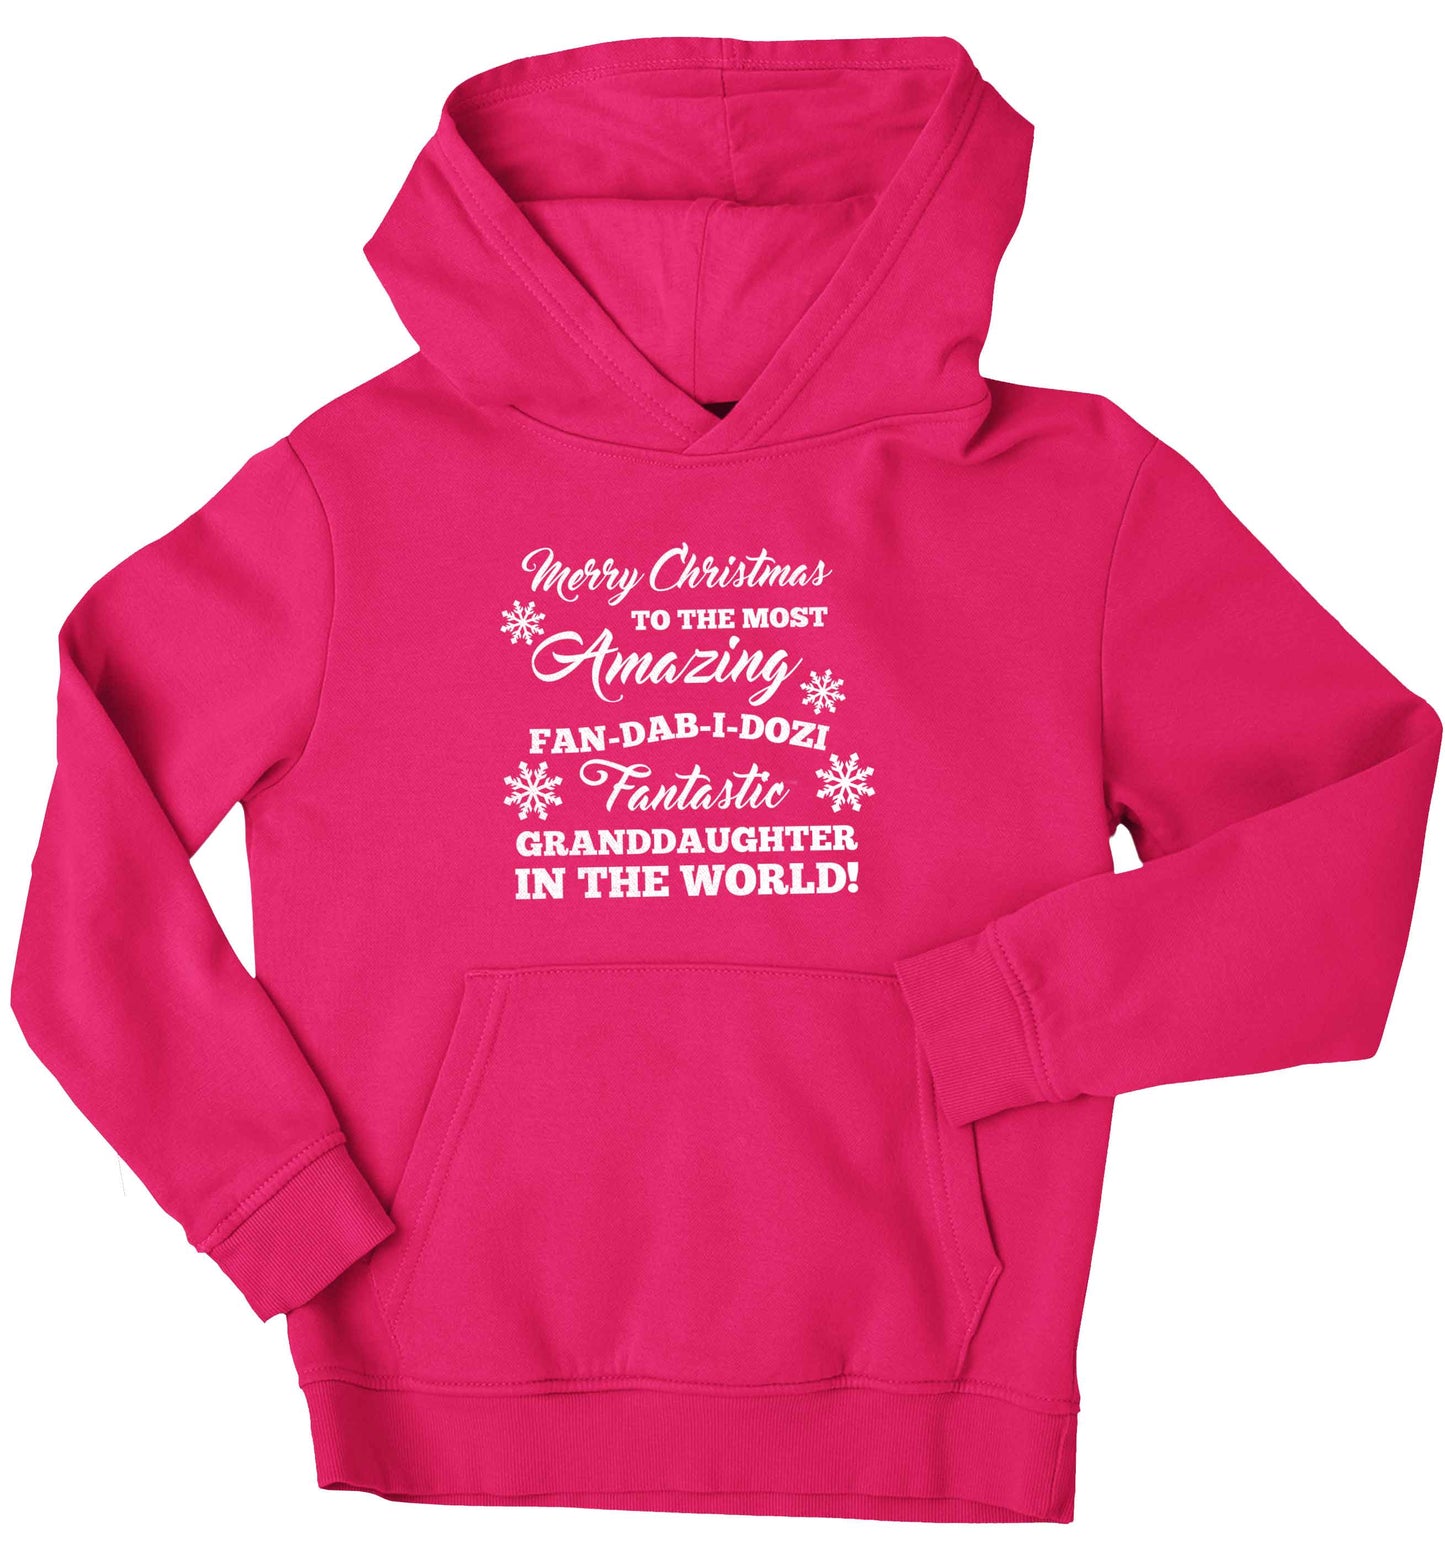 Merry Christmas to the most amazing fan-dab-i-dozi fantasic Granddaughter in the world children's pink hoodie 12-13 Years